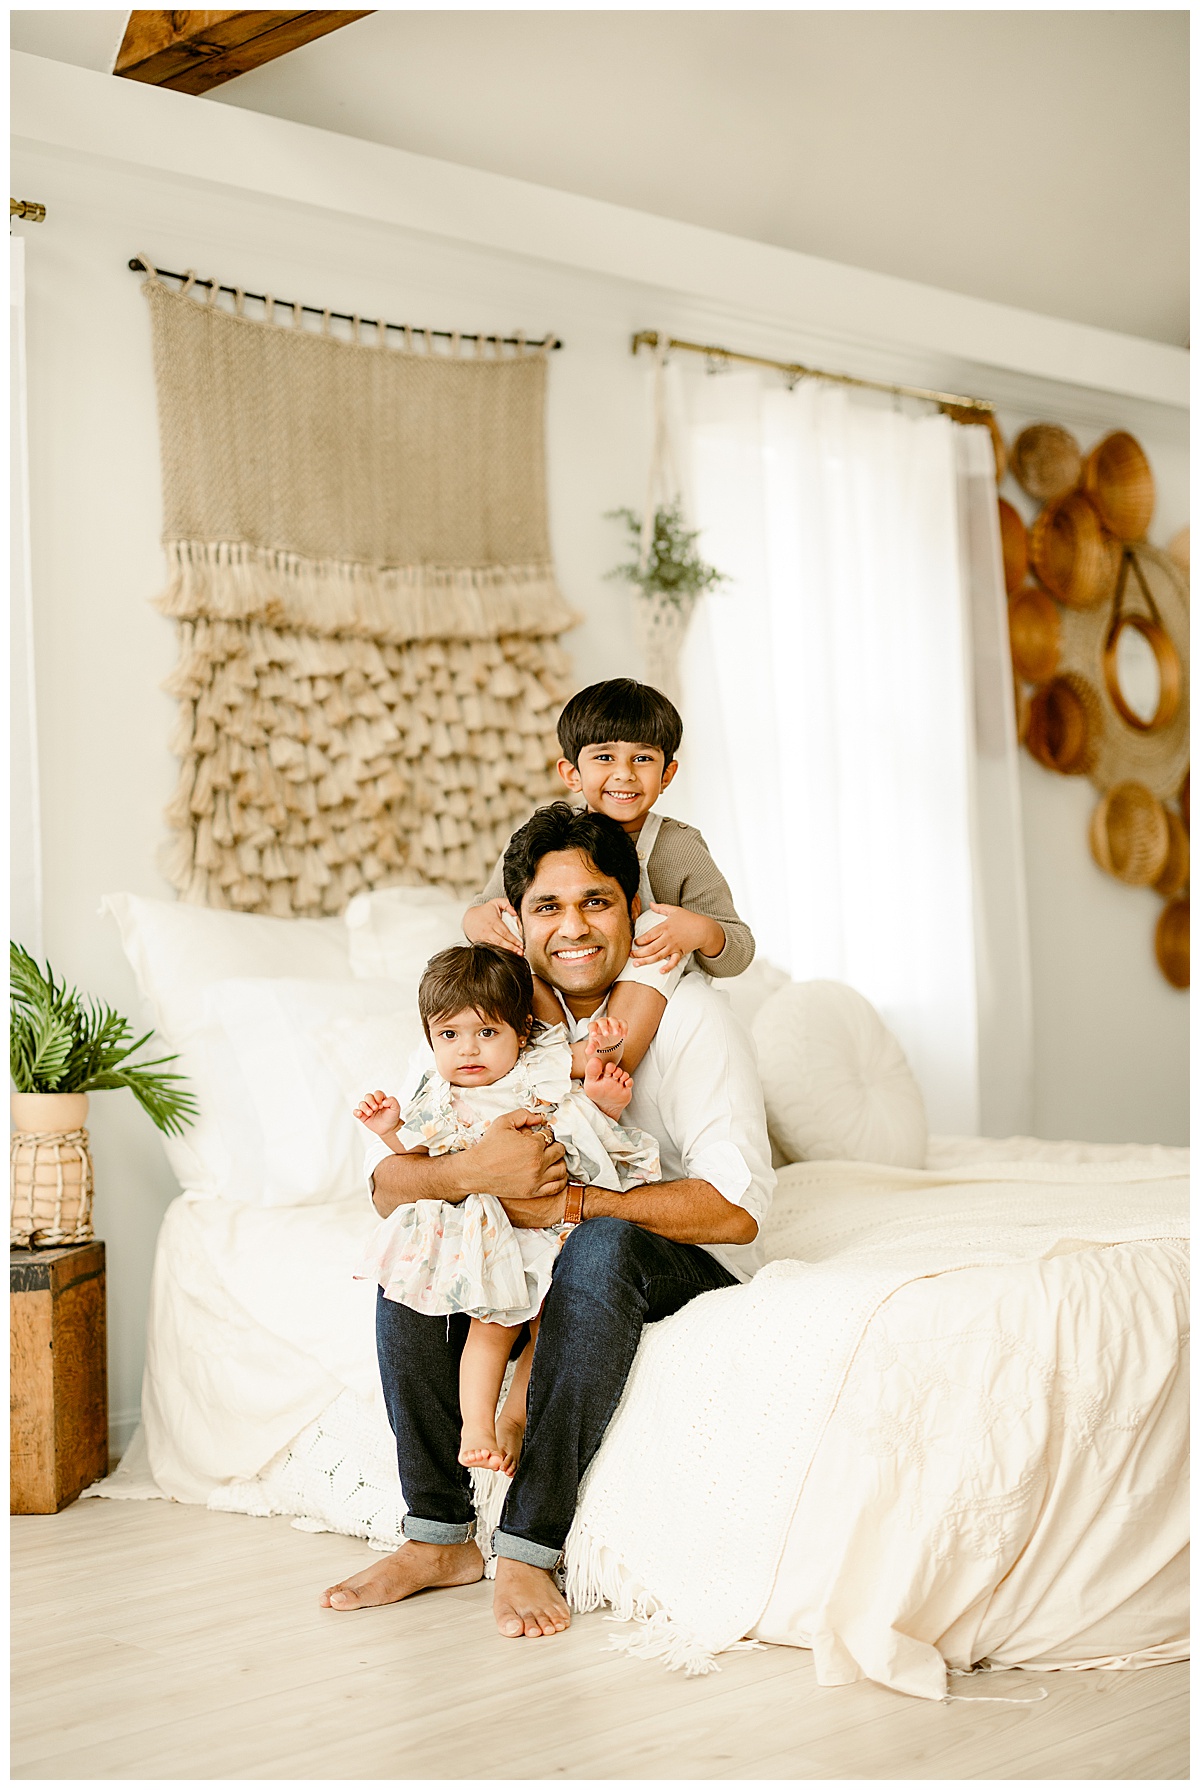 Dad sits with children on the bed during their Unposed Lifestyle Shoot